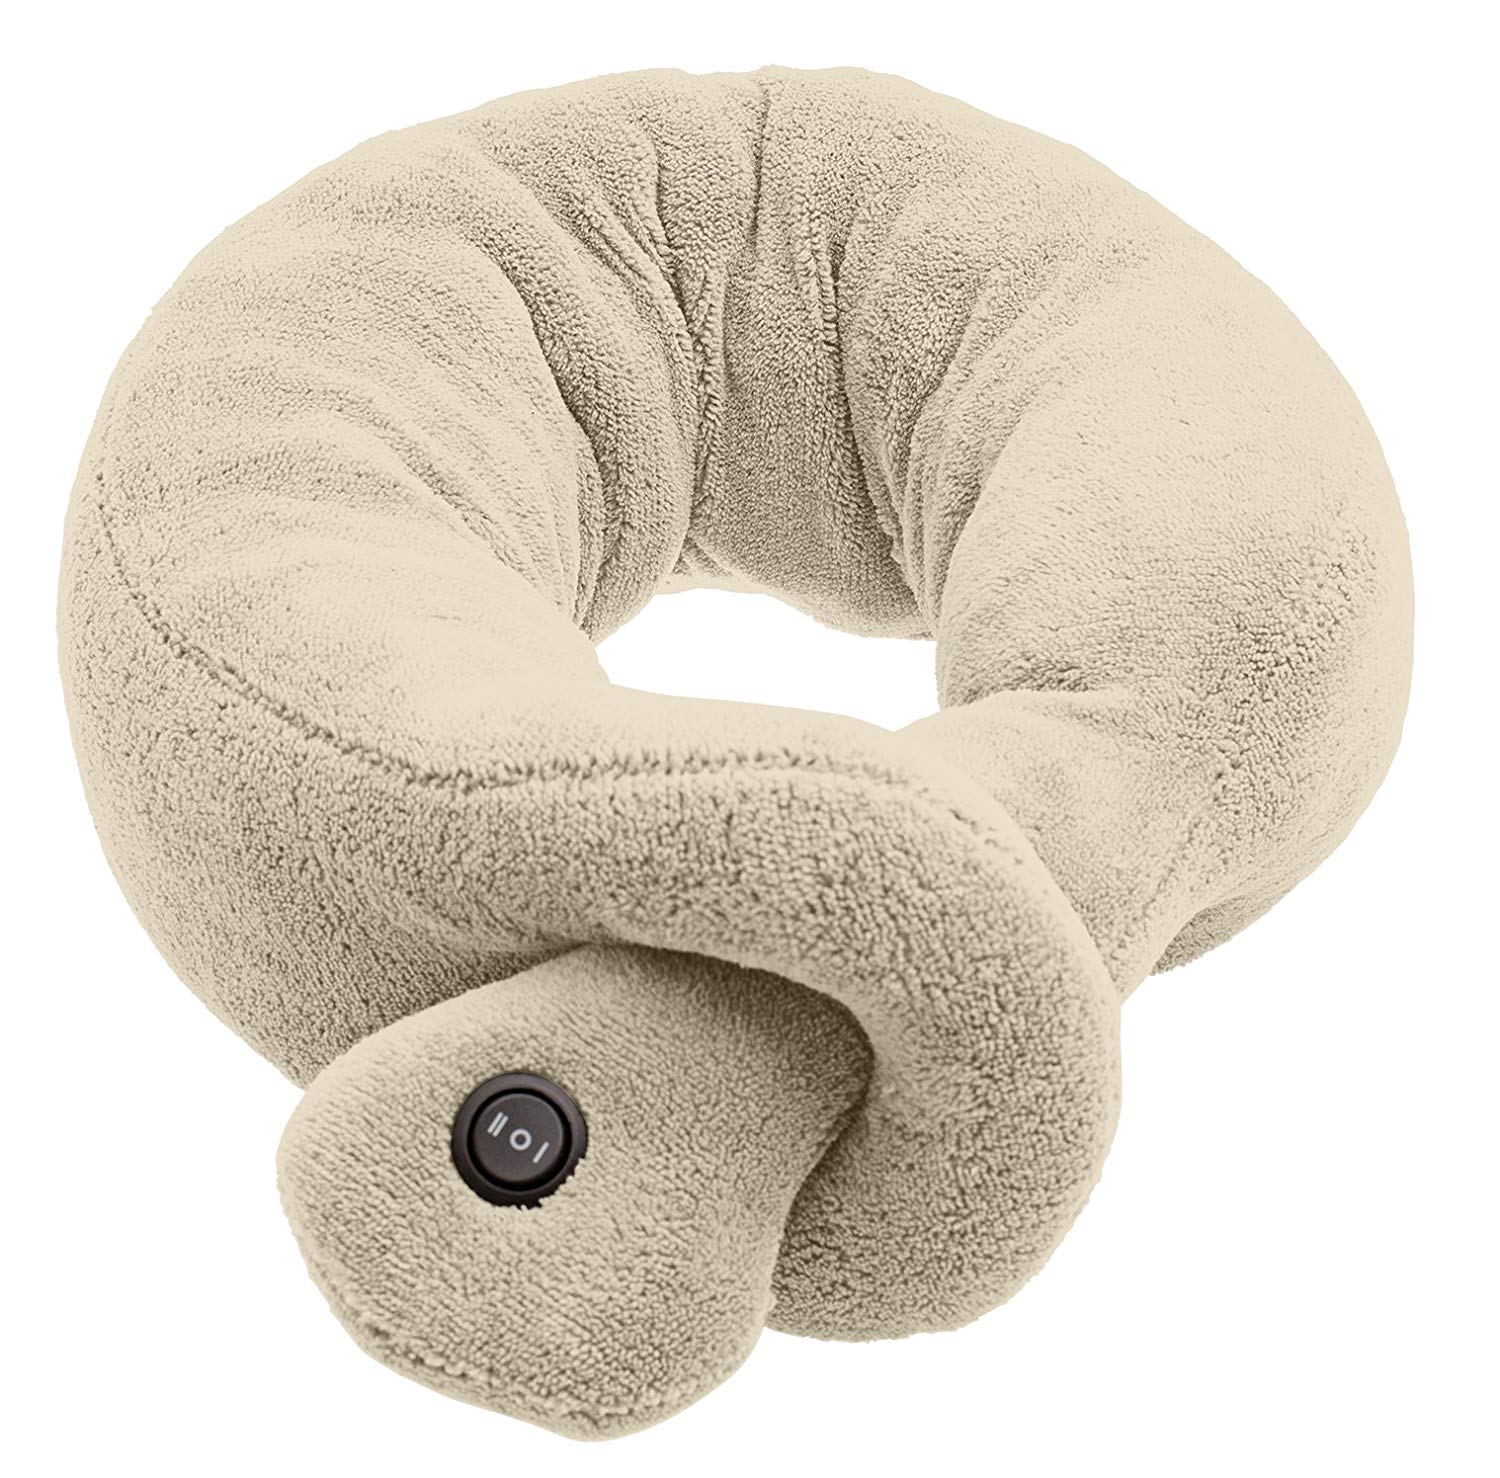 - Perfect Therapeutic Comfort for Travel Neck Support High Quality Peanut Pillow Juniper 